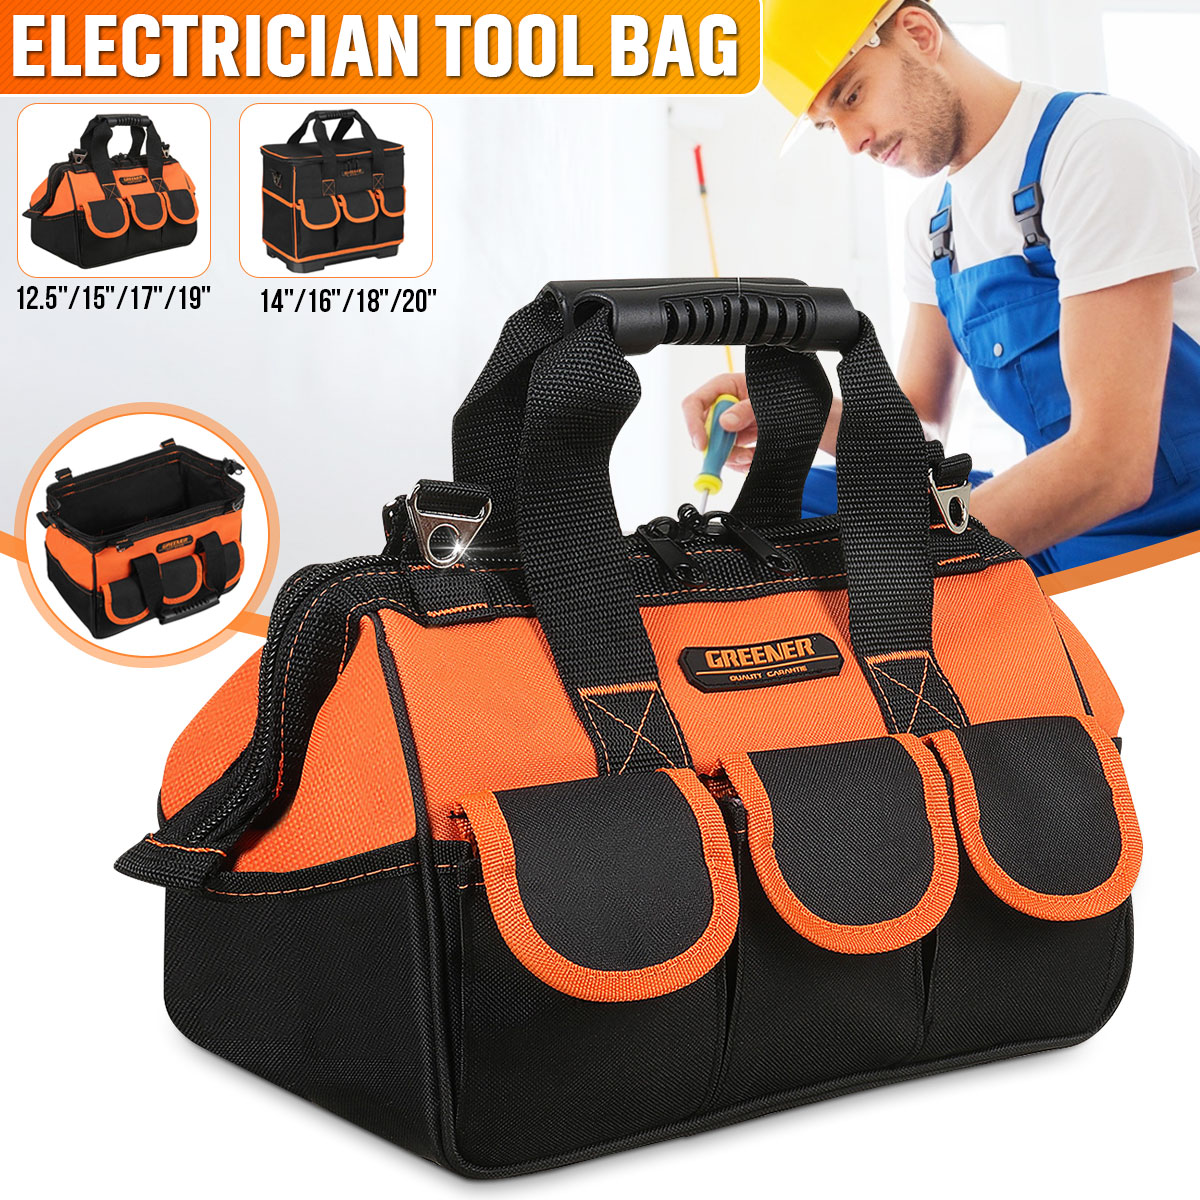 13-20-Heavy-Duty-Electrician-Tool-Bags-Tool-Storage-with-Handle--Shoulder-Strap-1849107-1